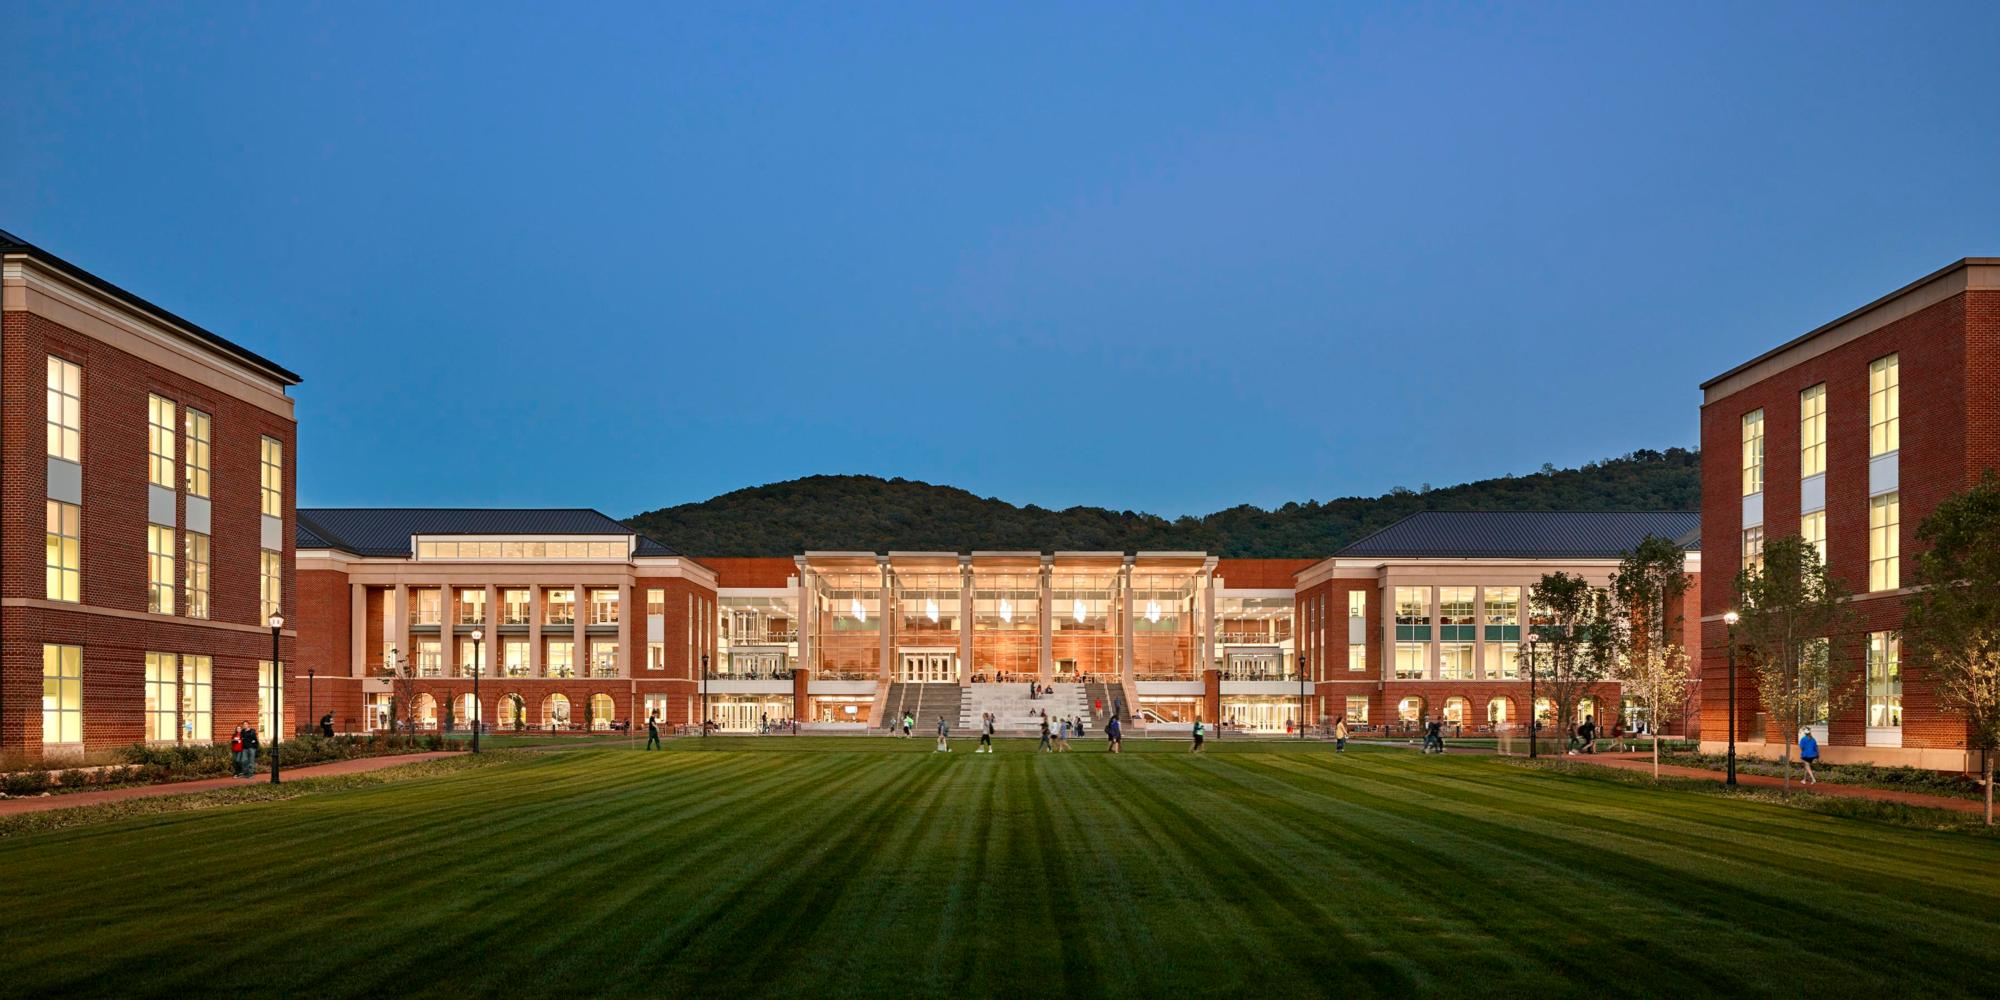 Exterior image of the Liberty University Montview Union with green lawns and bricked buildings